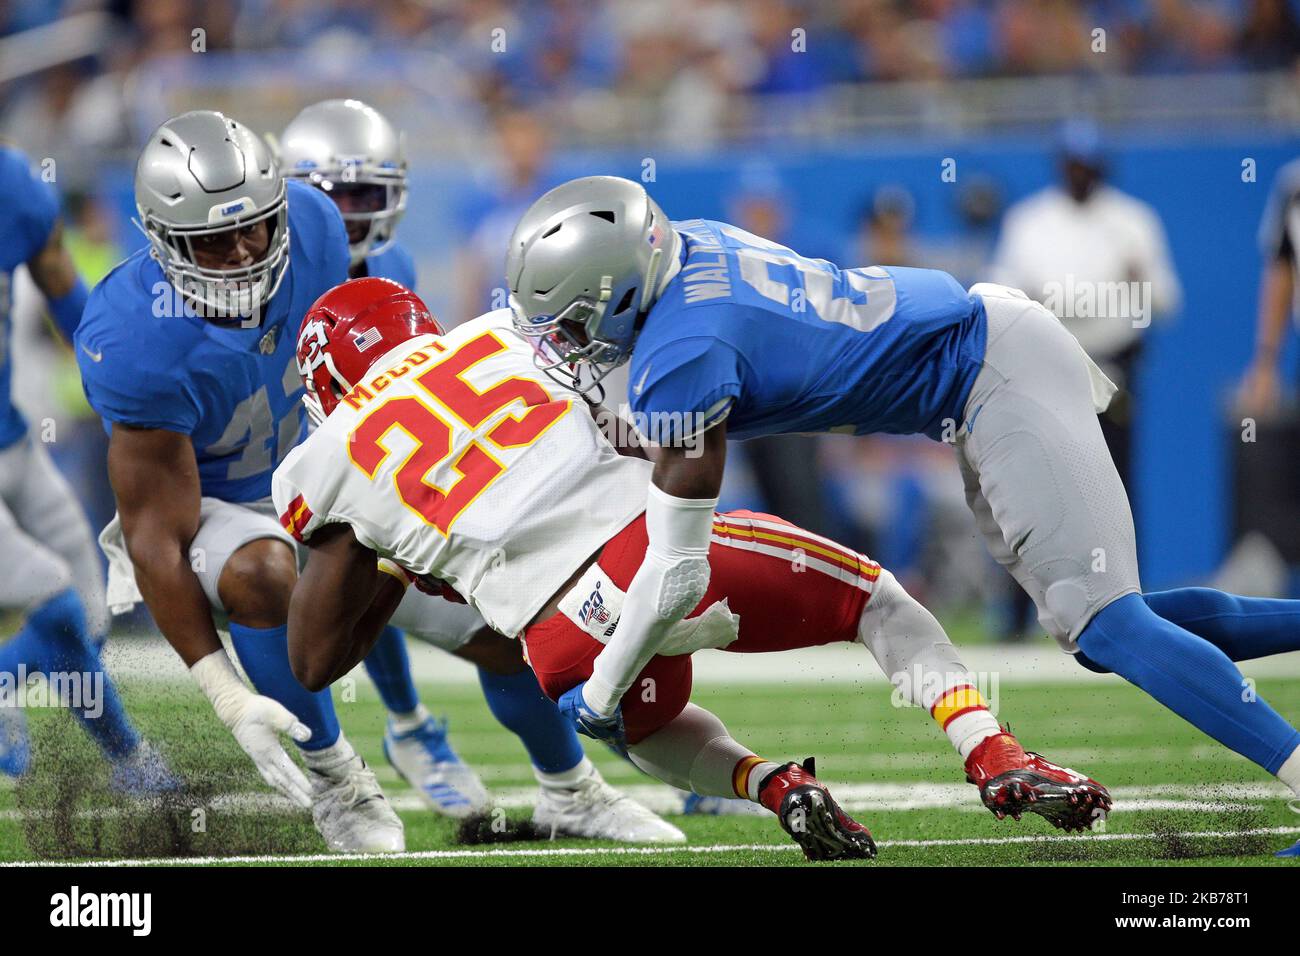 Kansas City Chiefs running back LeSean McCoy (25) is tackled by Detroit Lions defensive back Tracy Walker (21) during the first half of an NFL football game in Detroit, Michigan USA, on Sunday, September 29, 2019 (Photo by Jorge Lemus/NurPhoto) Stock Photo